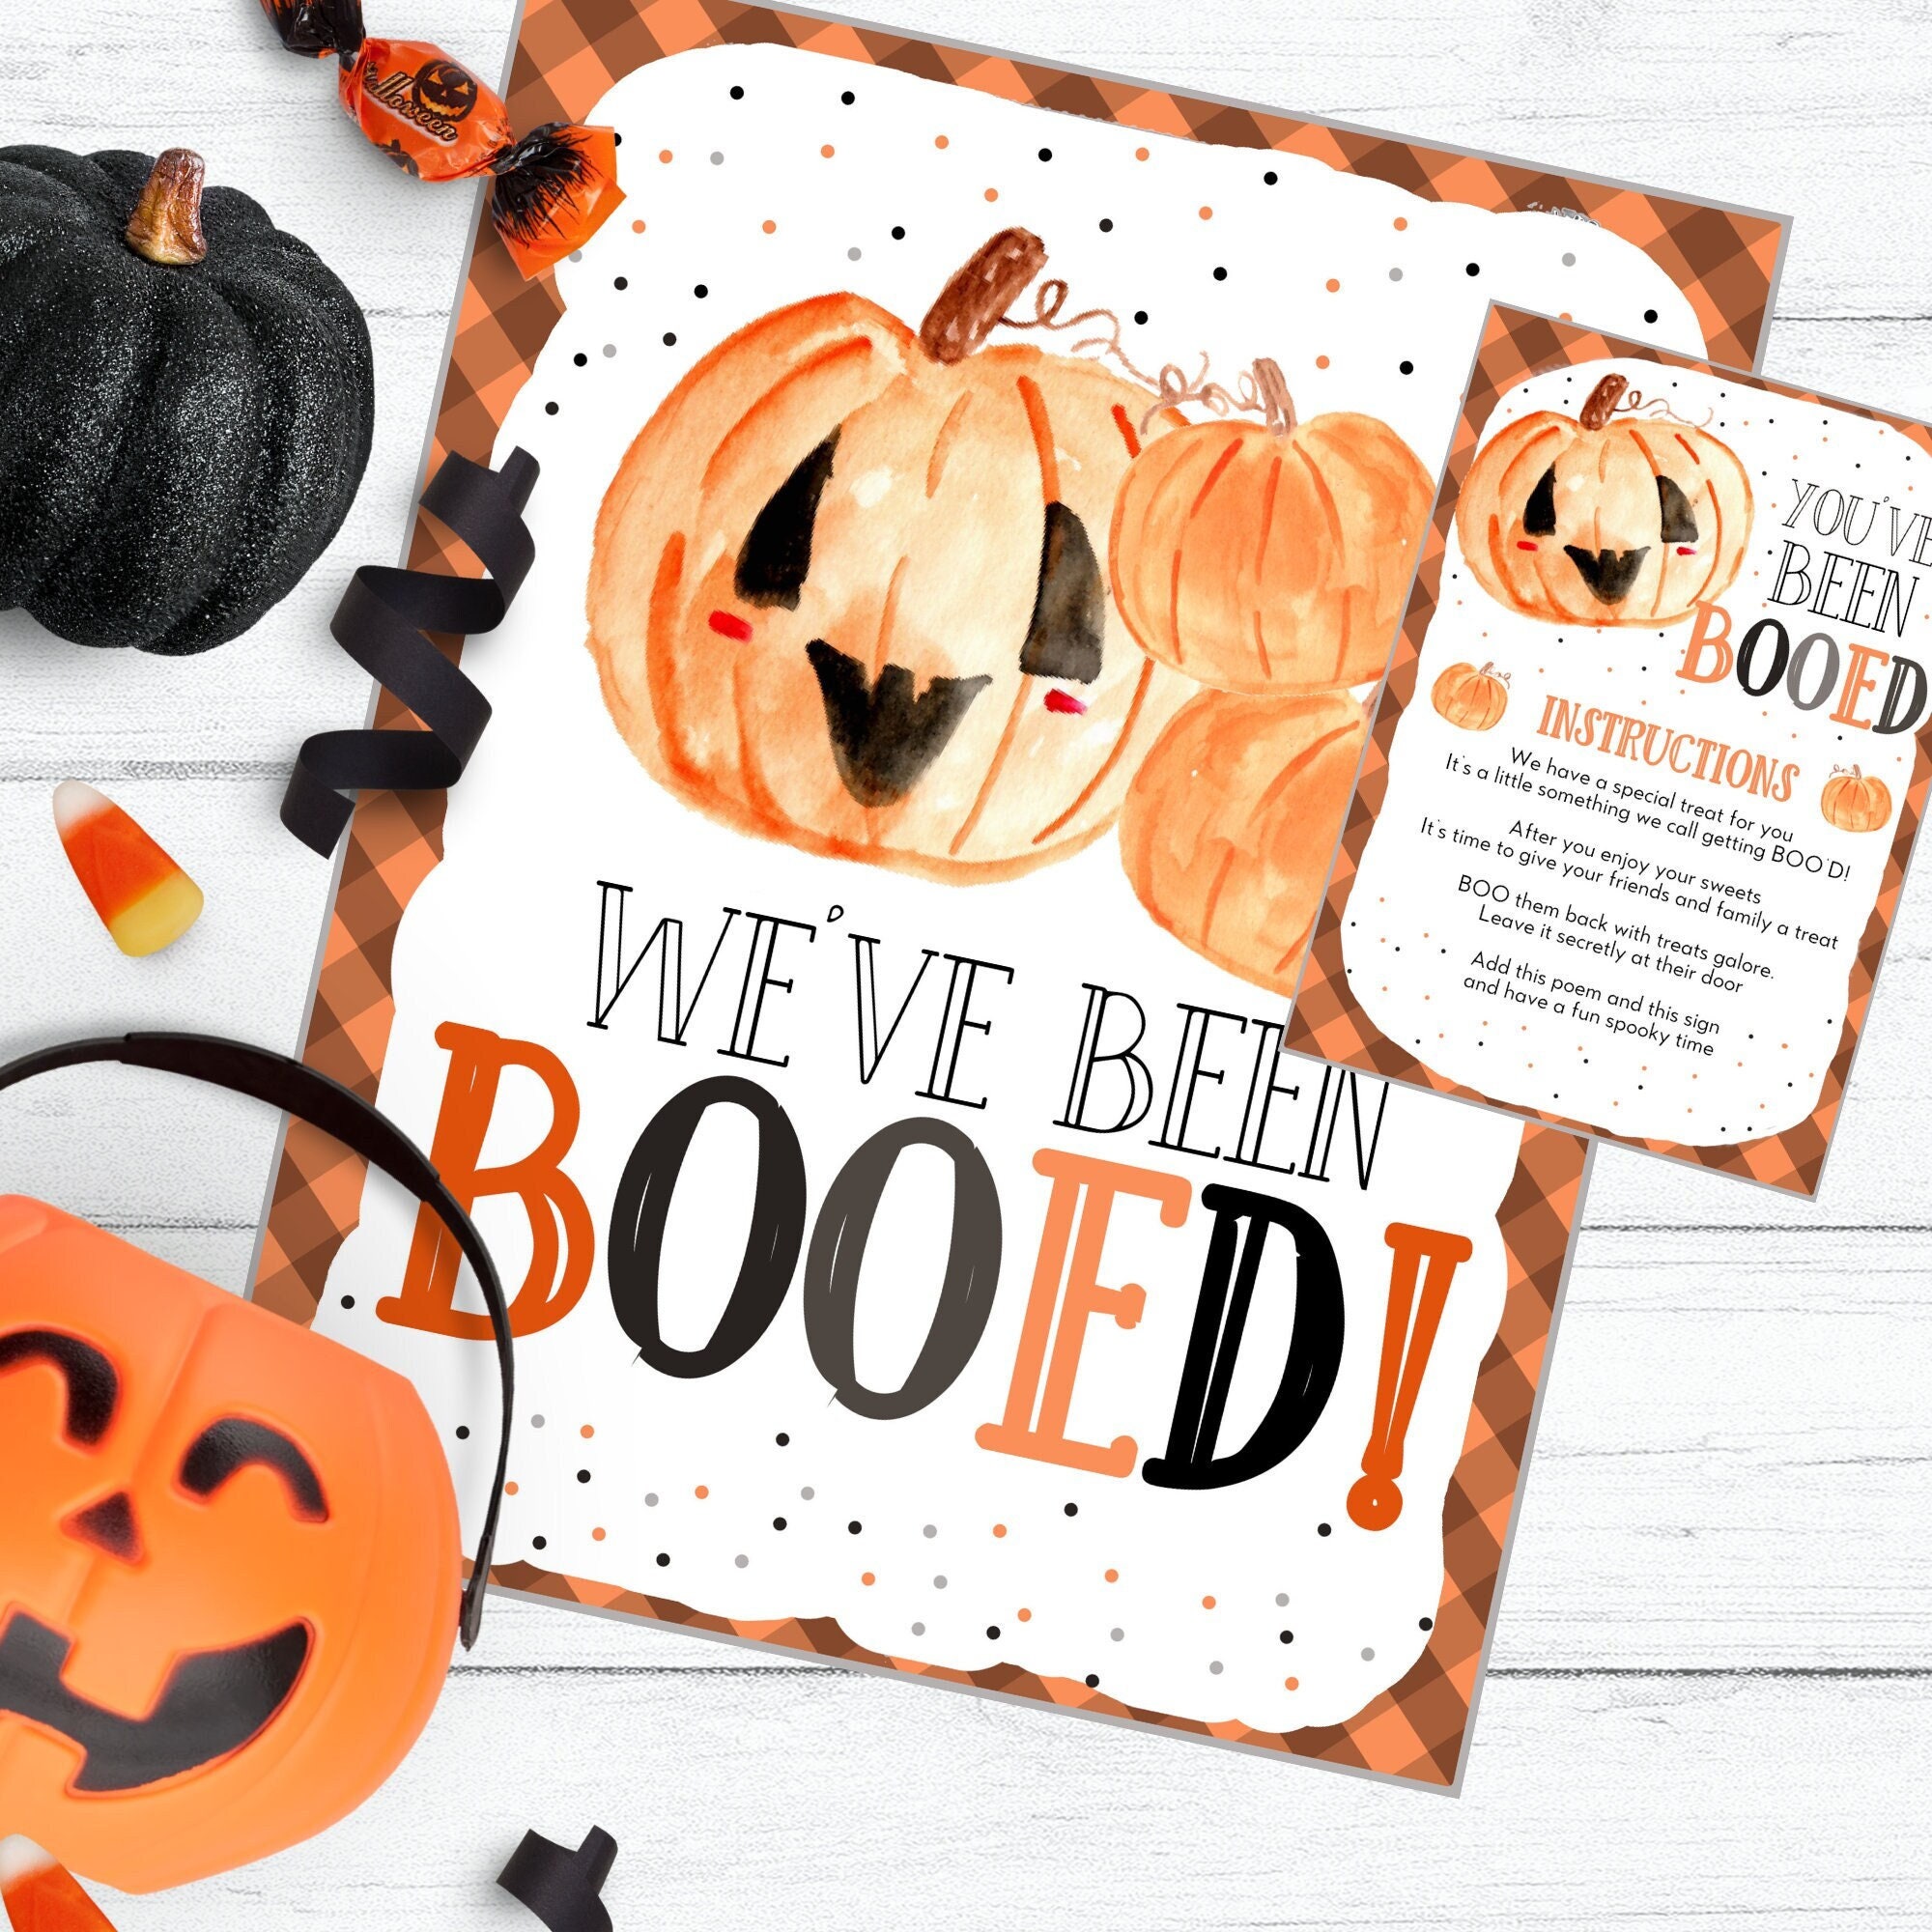 You've Been Booed Halloween Family Activity - The Littles & Me